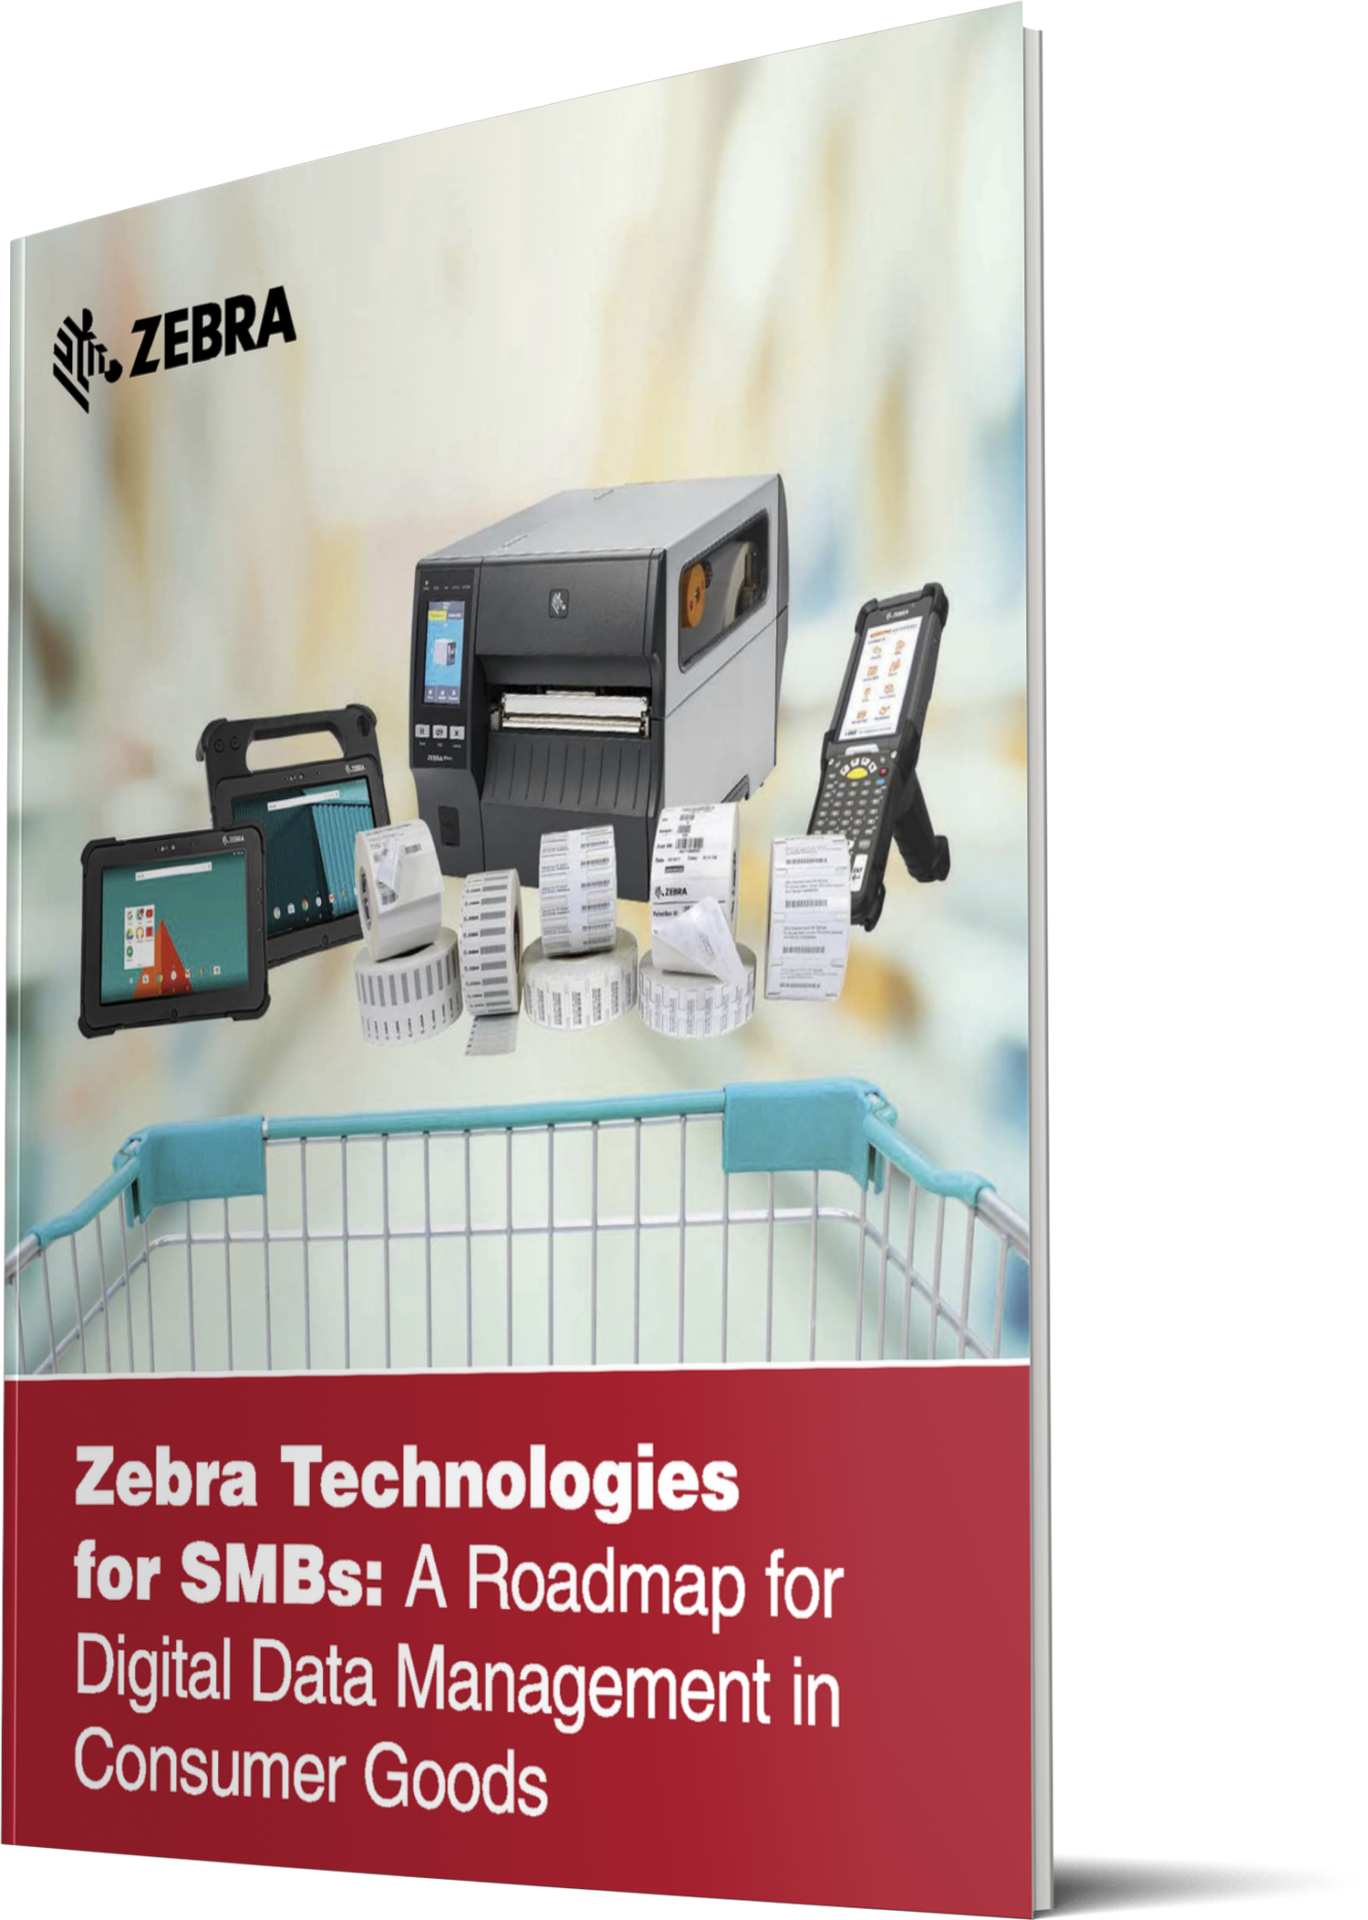 The cover of the Zebra RFID eBook